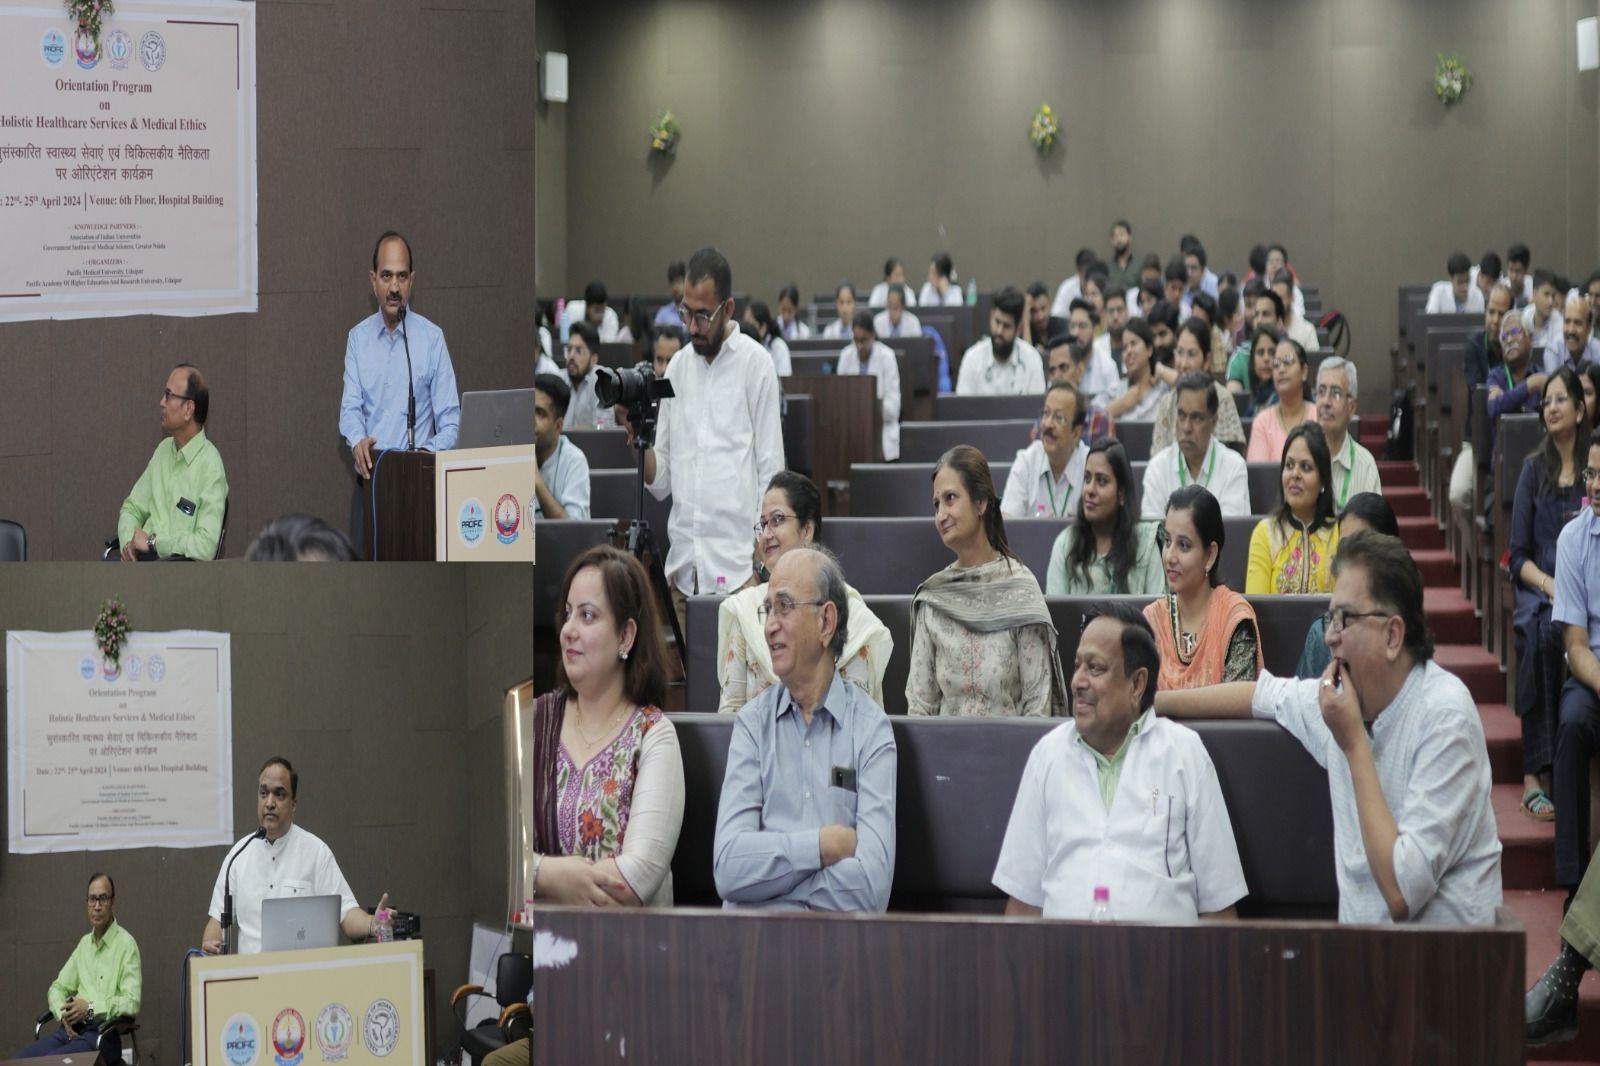 Orientation Program on "Cultured Healthcare Services and Medical Ethics